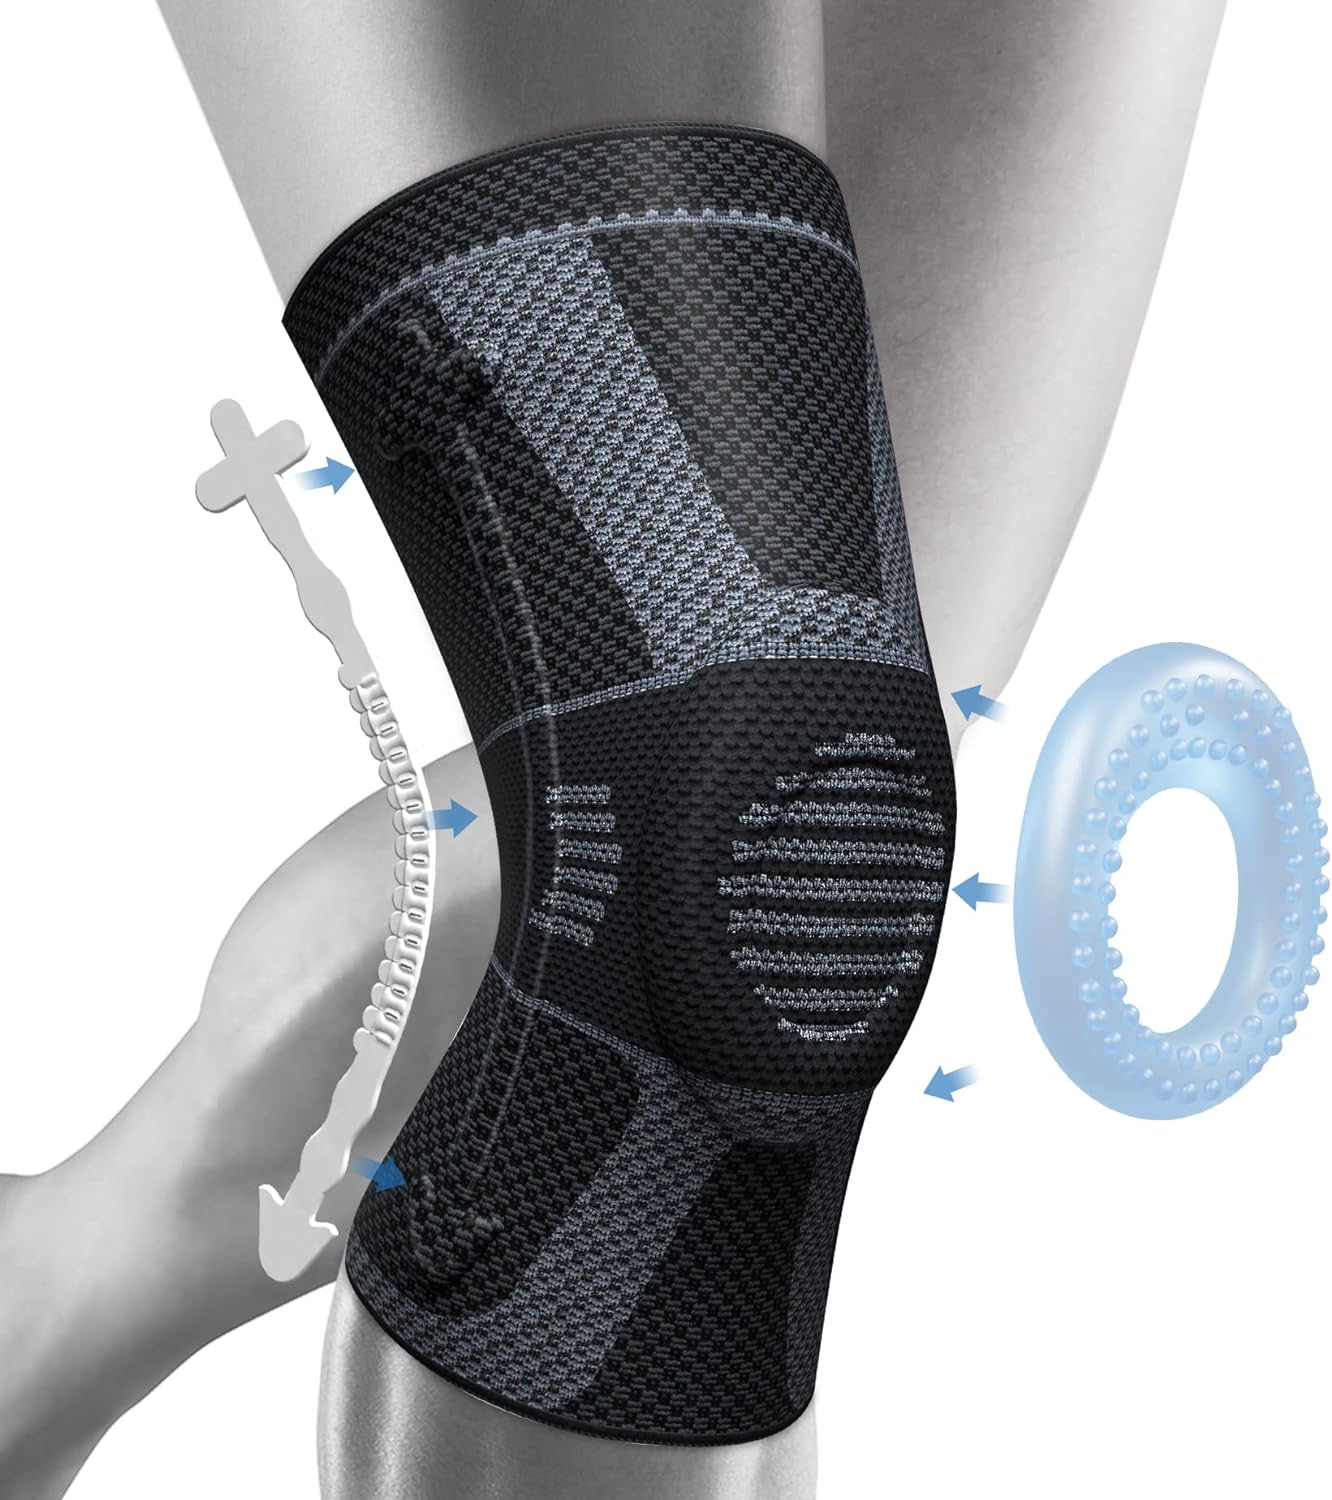 NEENCA Knee Brace for Knee Pain Knee Support with Side Stabilizers